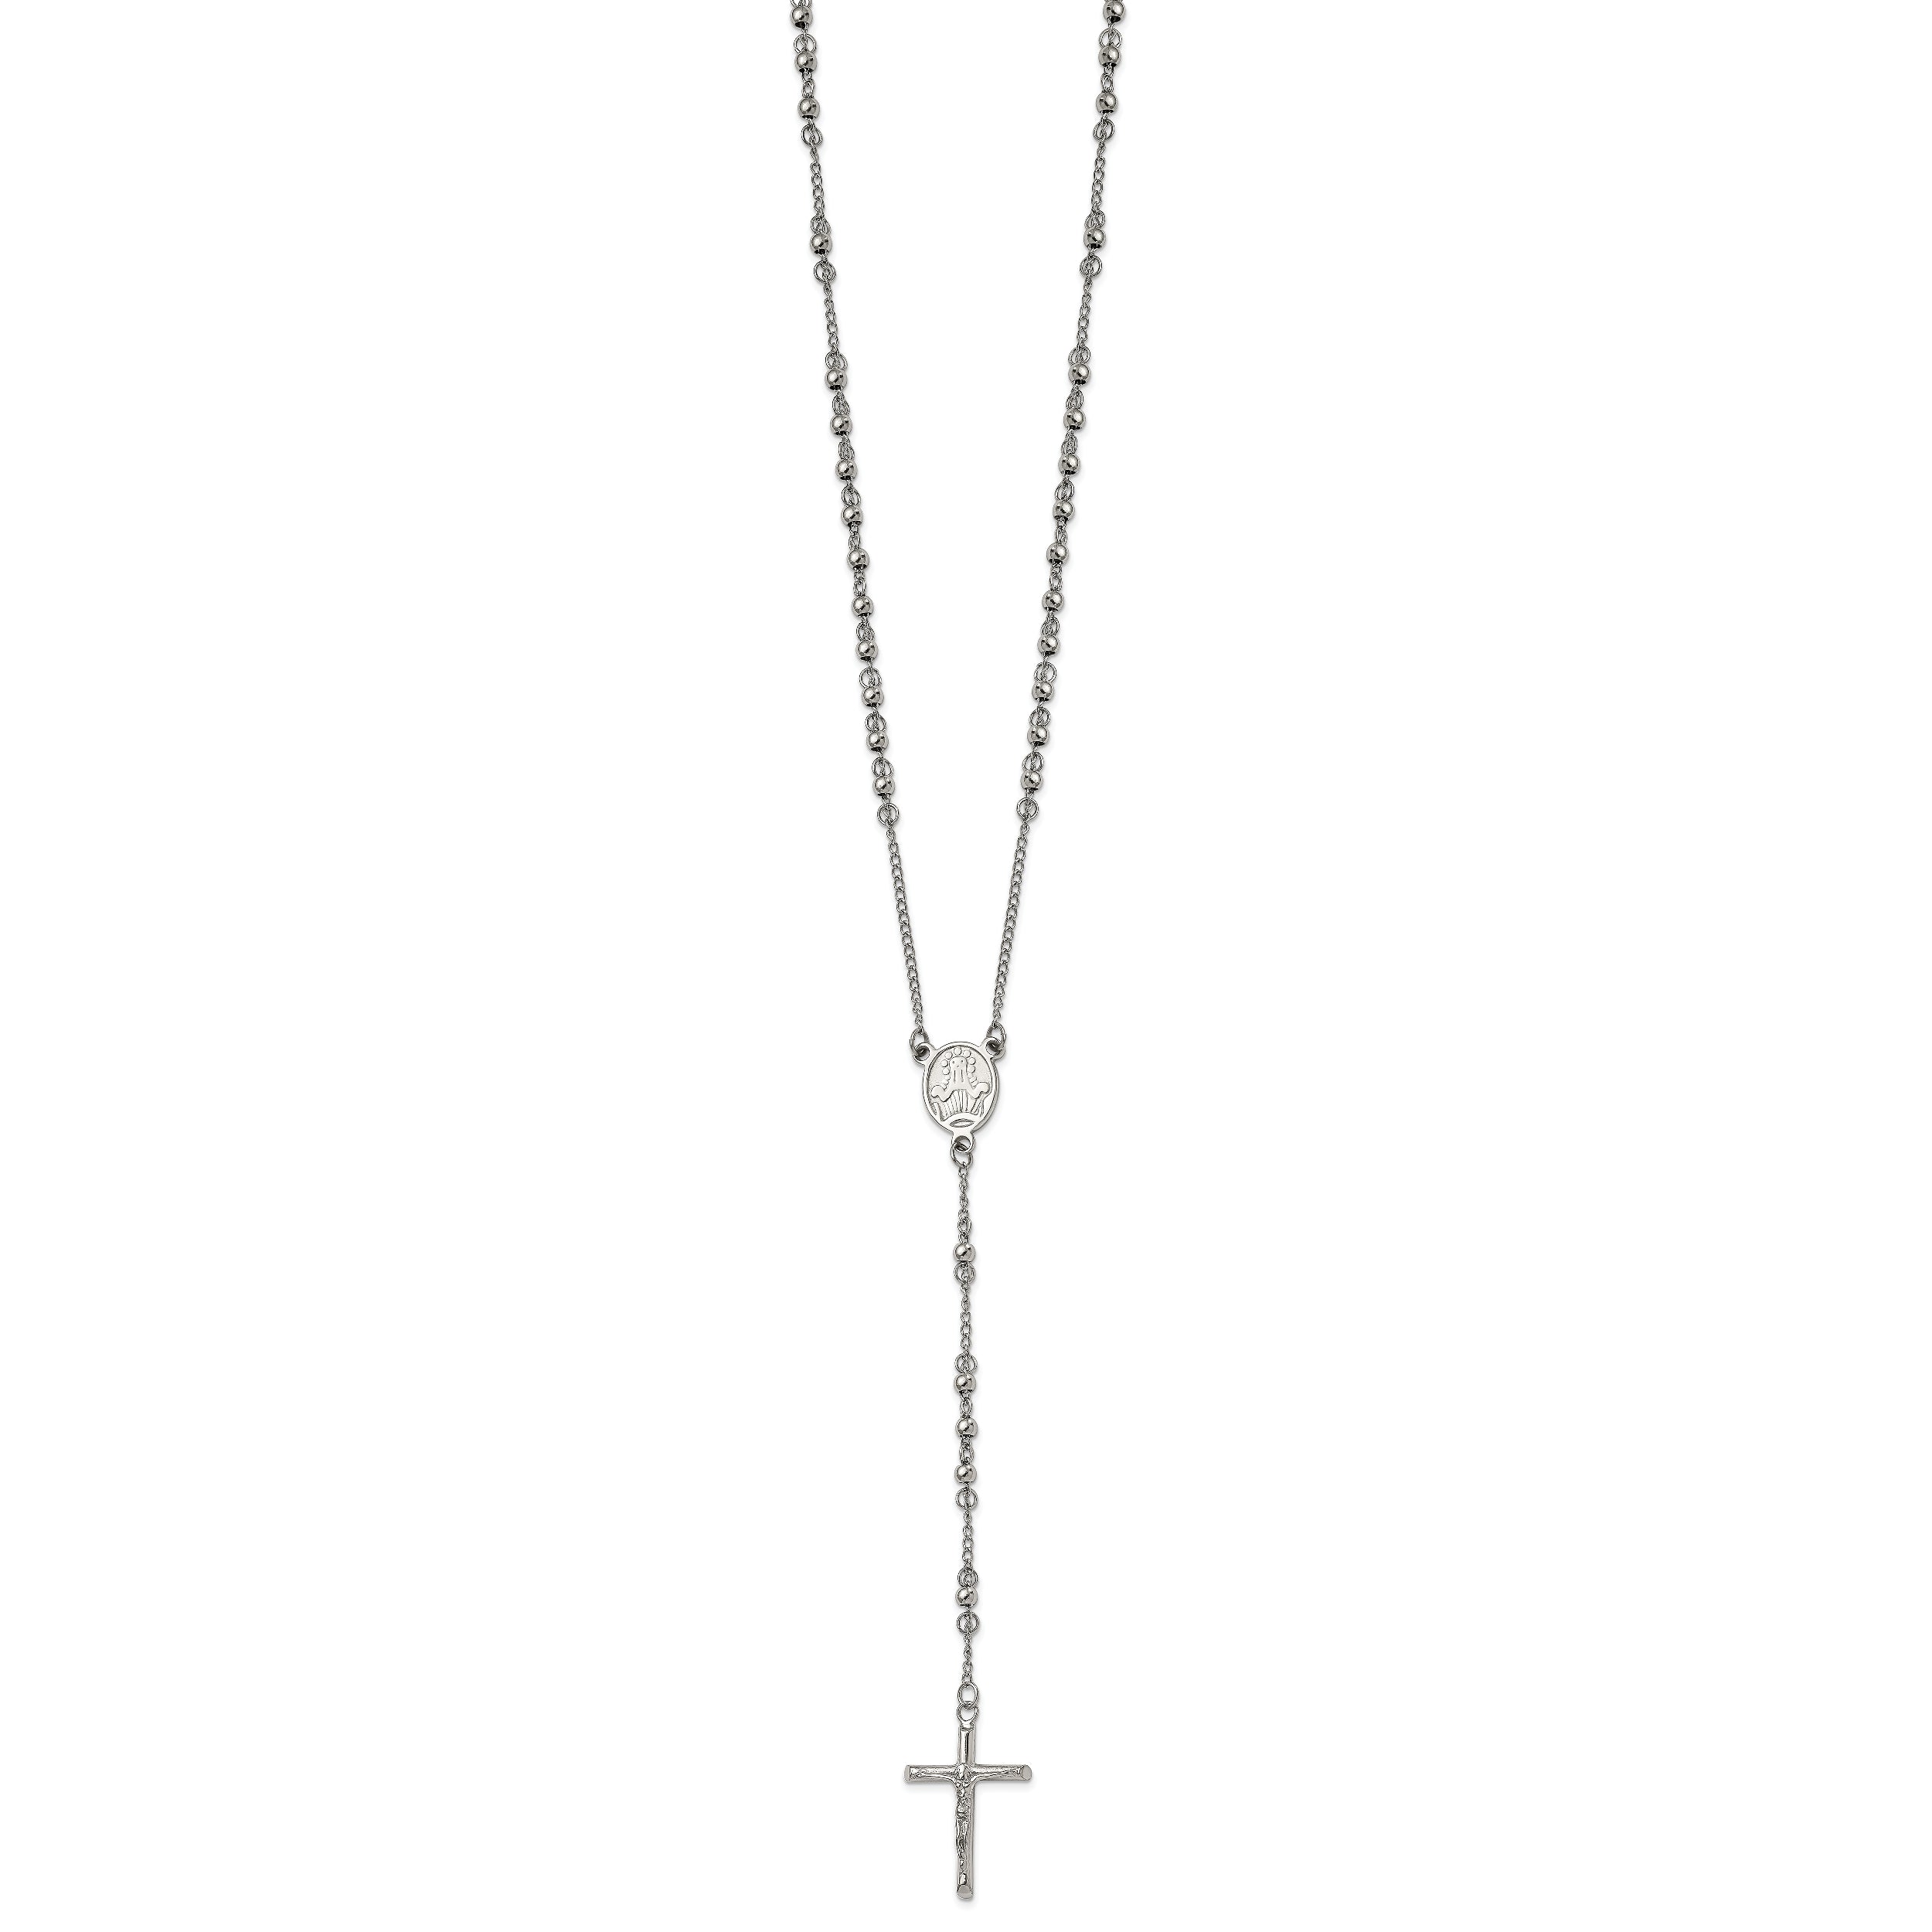 Chisel Stainless Steel Polished 4mm Beaded 25 inch Rosary Necklace